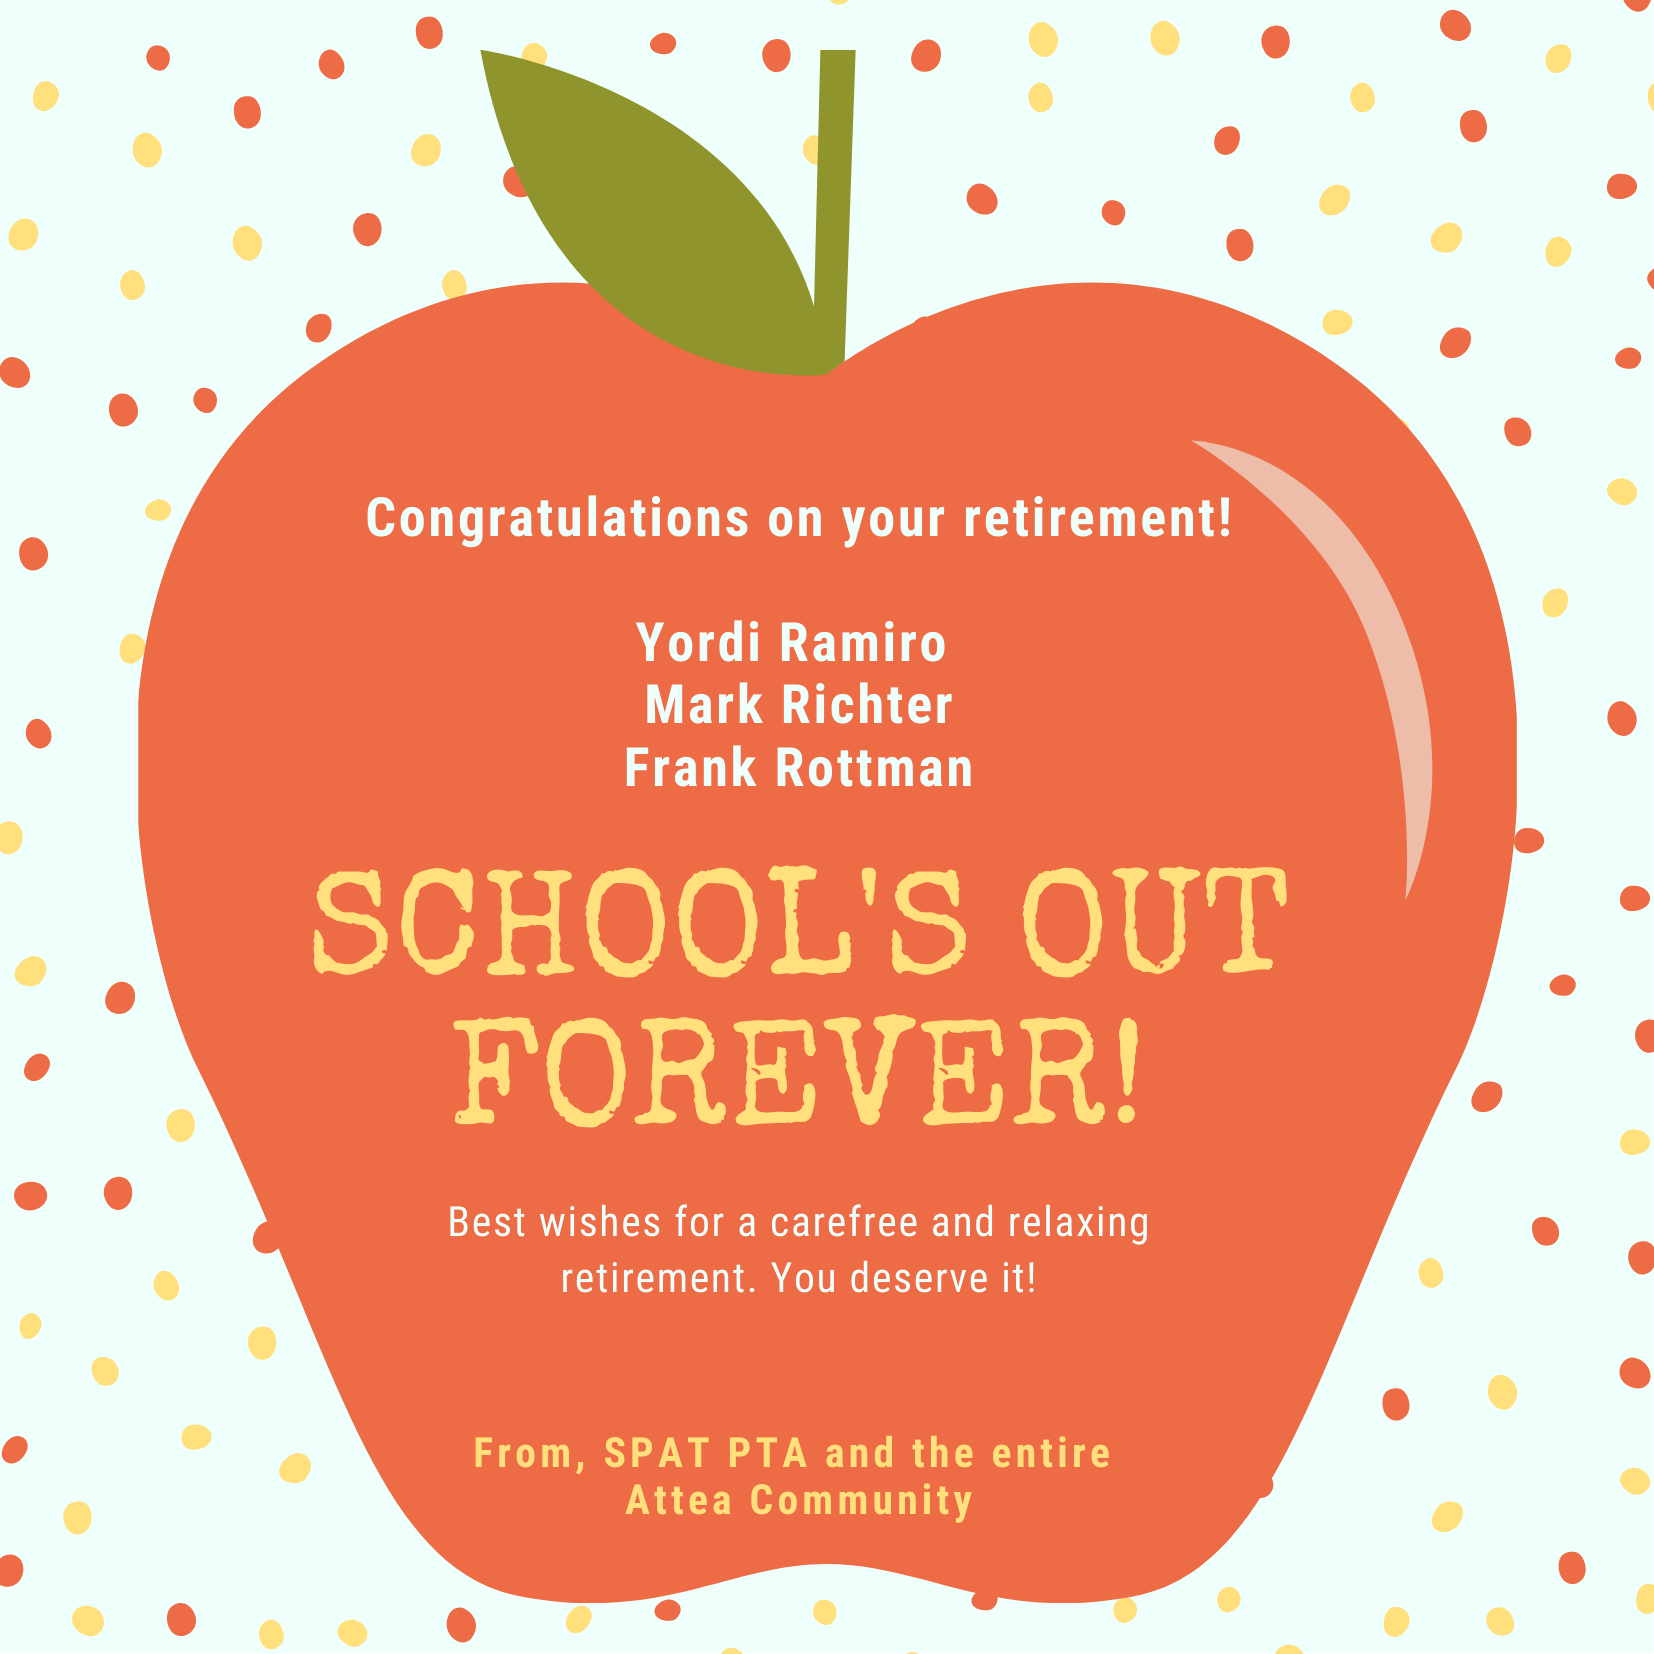 School's Out Forever!